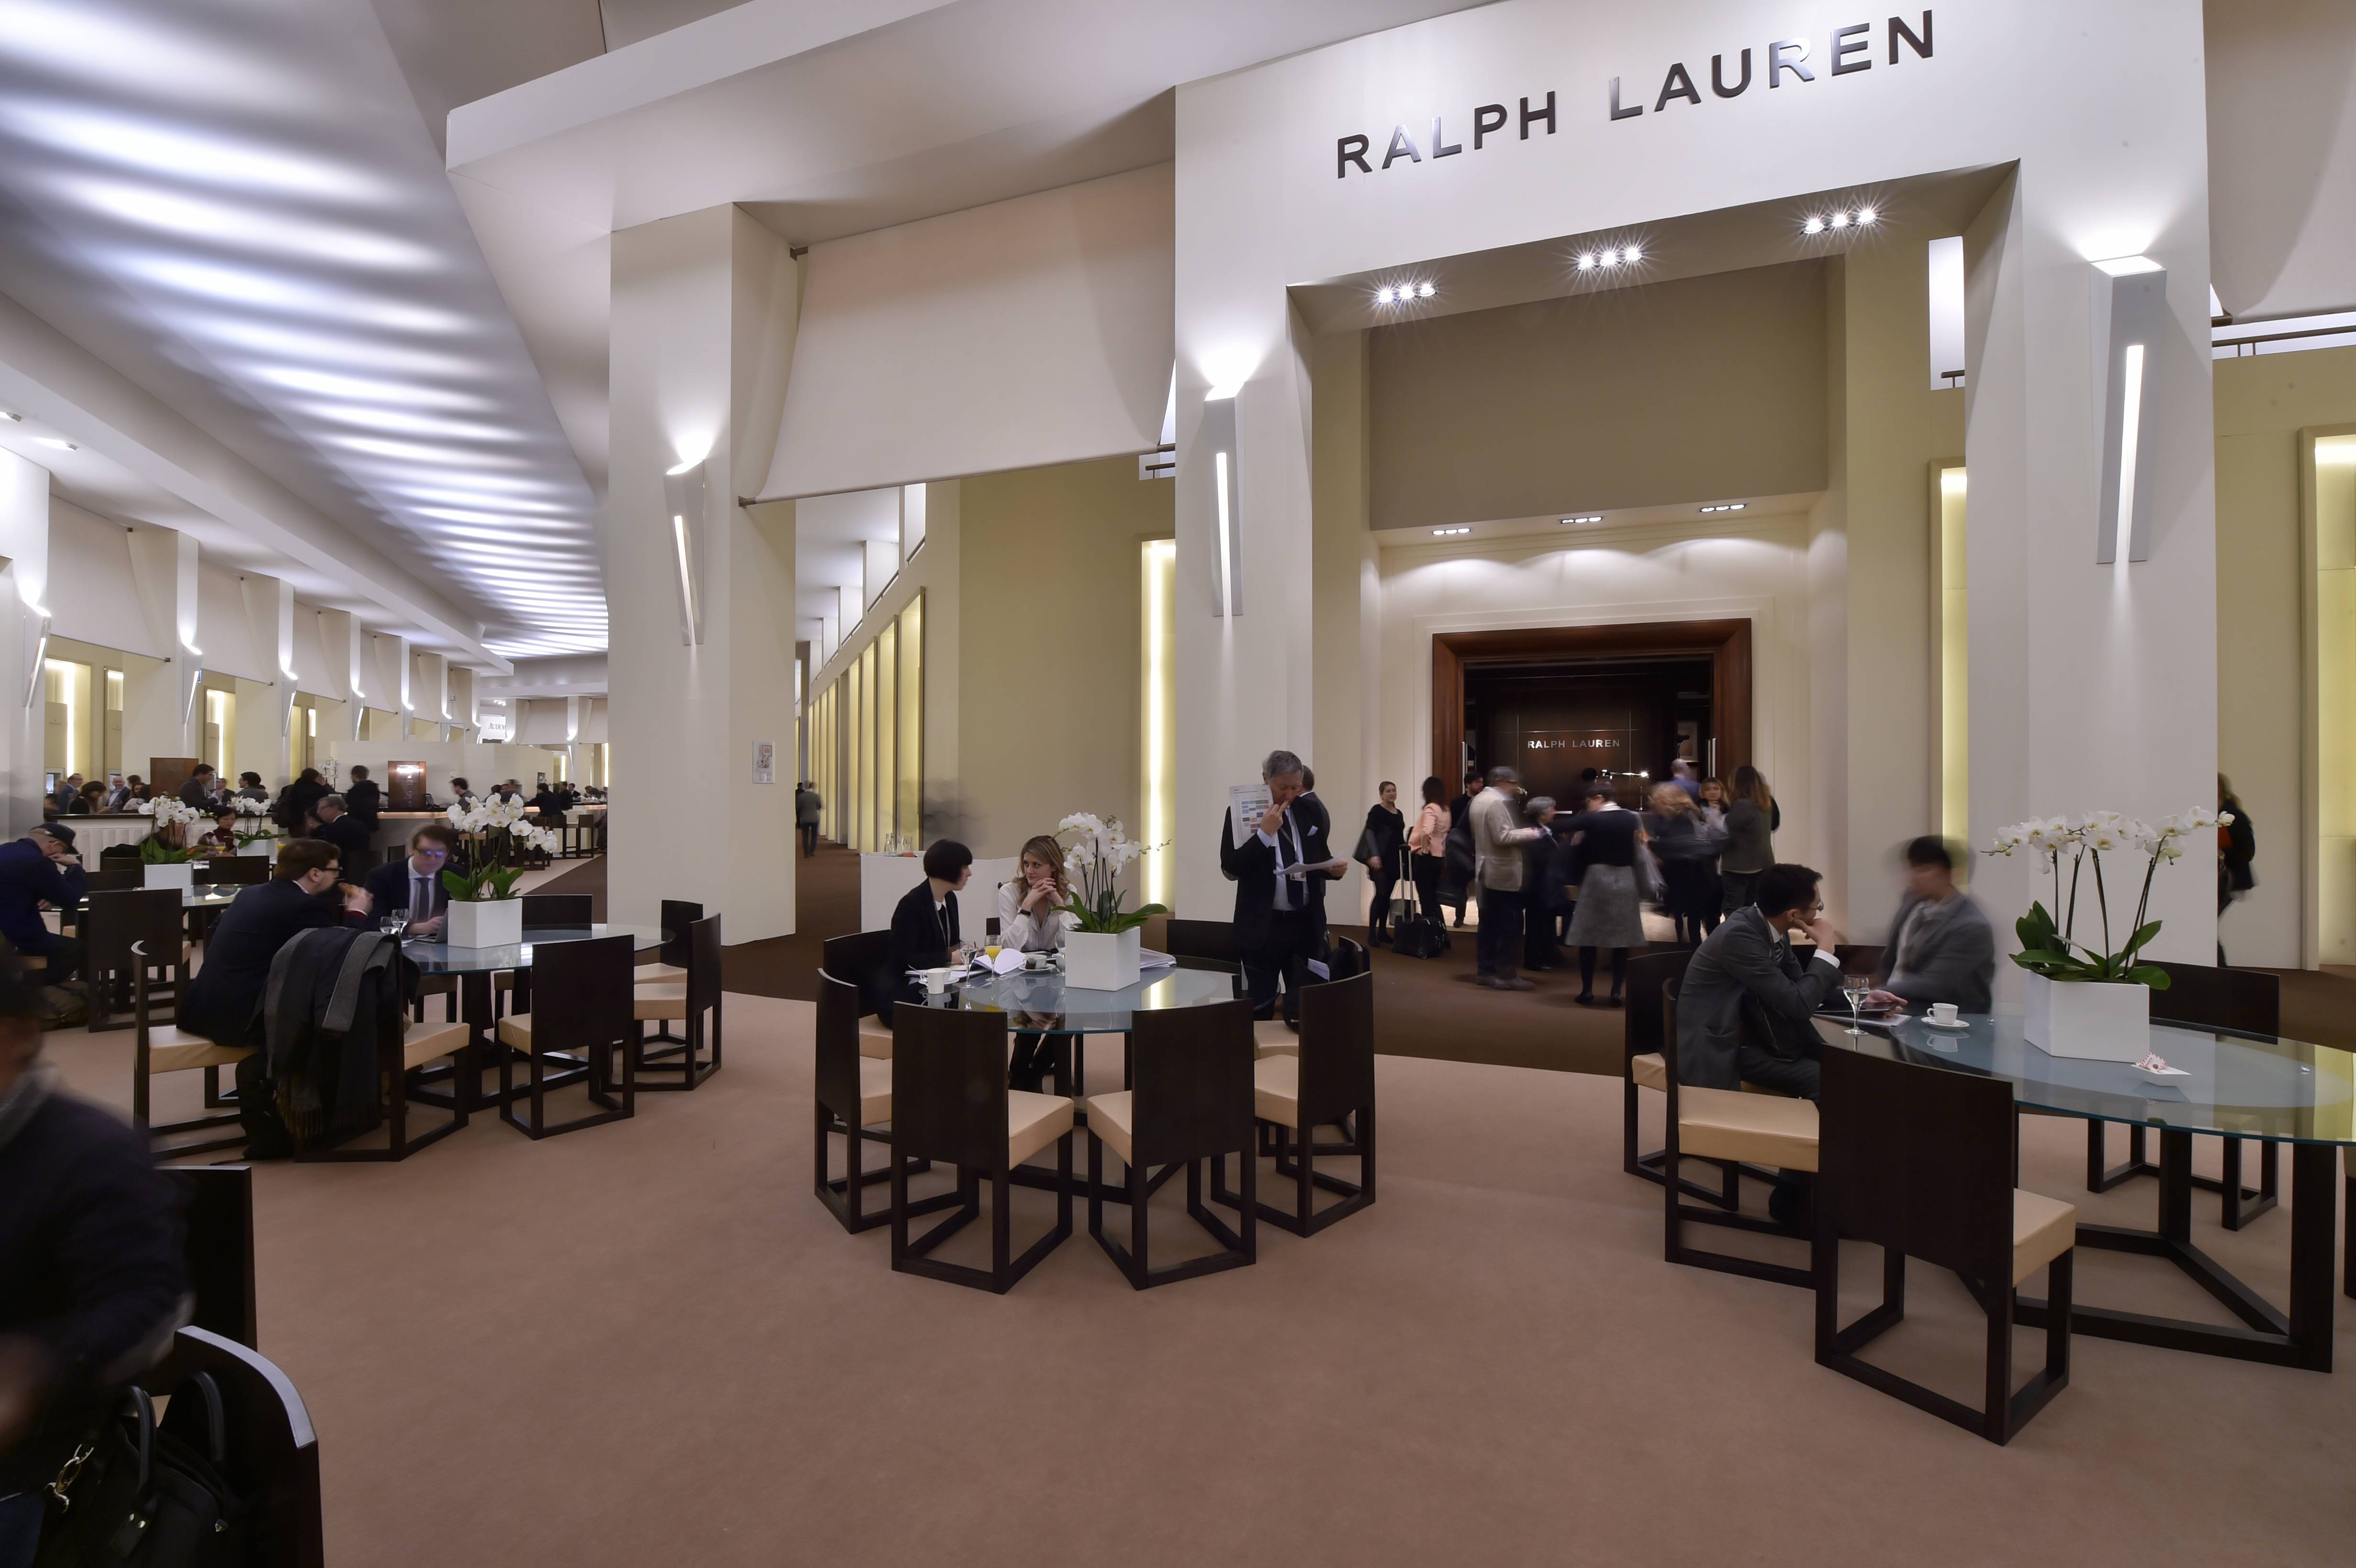 SIHH 2016: What The Addition Of New Brands Means For The Fair